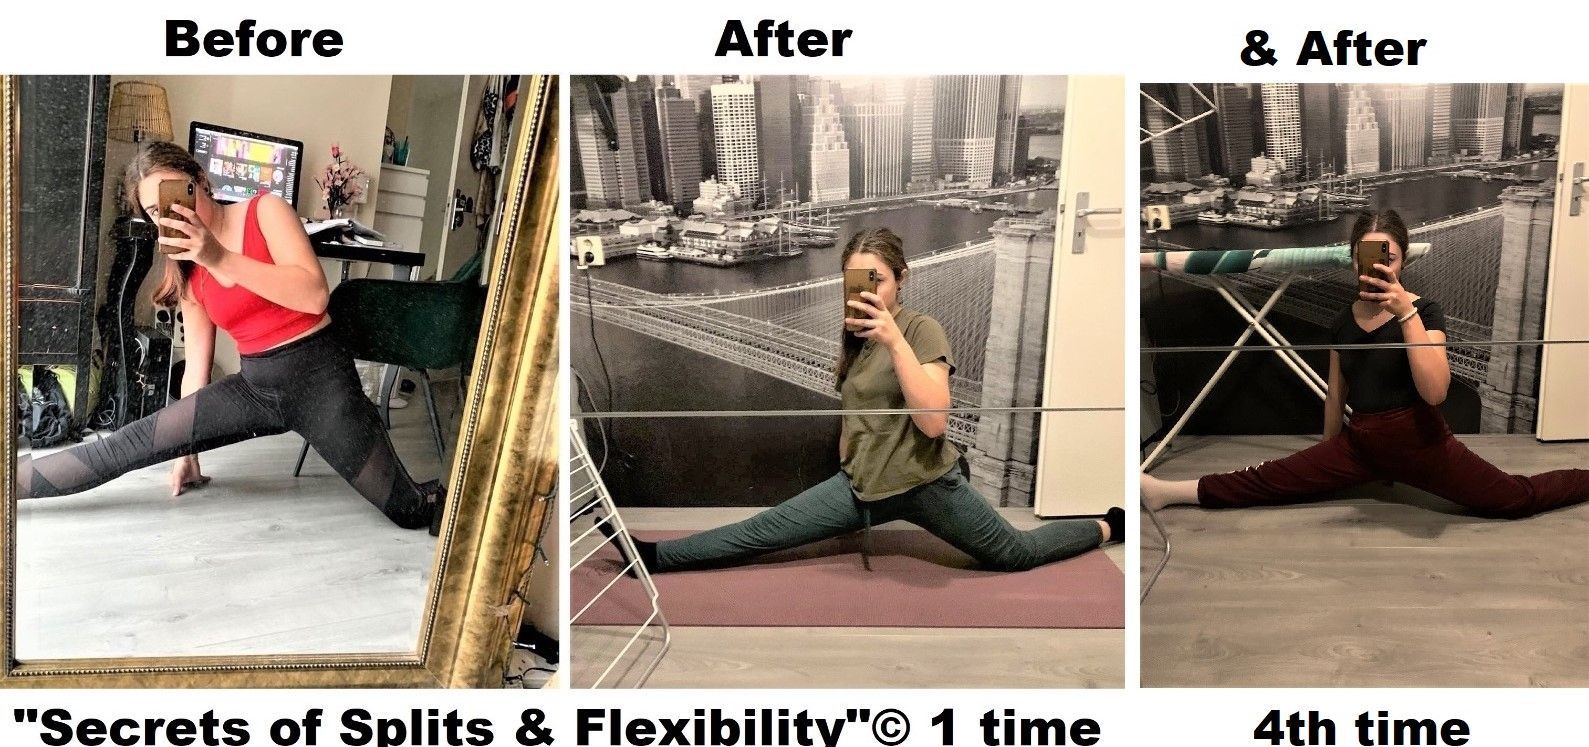 Thank you Stacey for your flexibility programs for splits & increasing flexibility